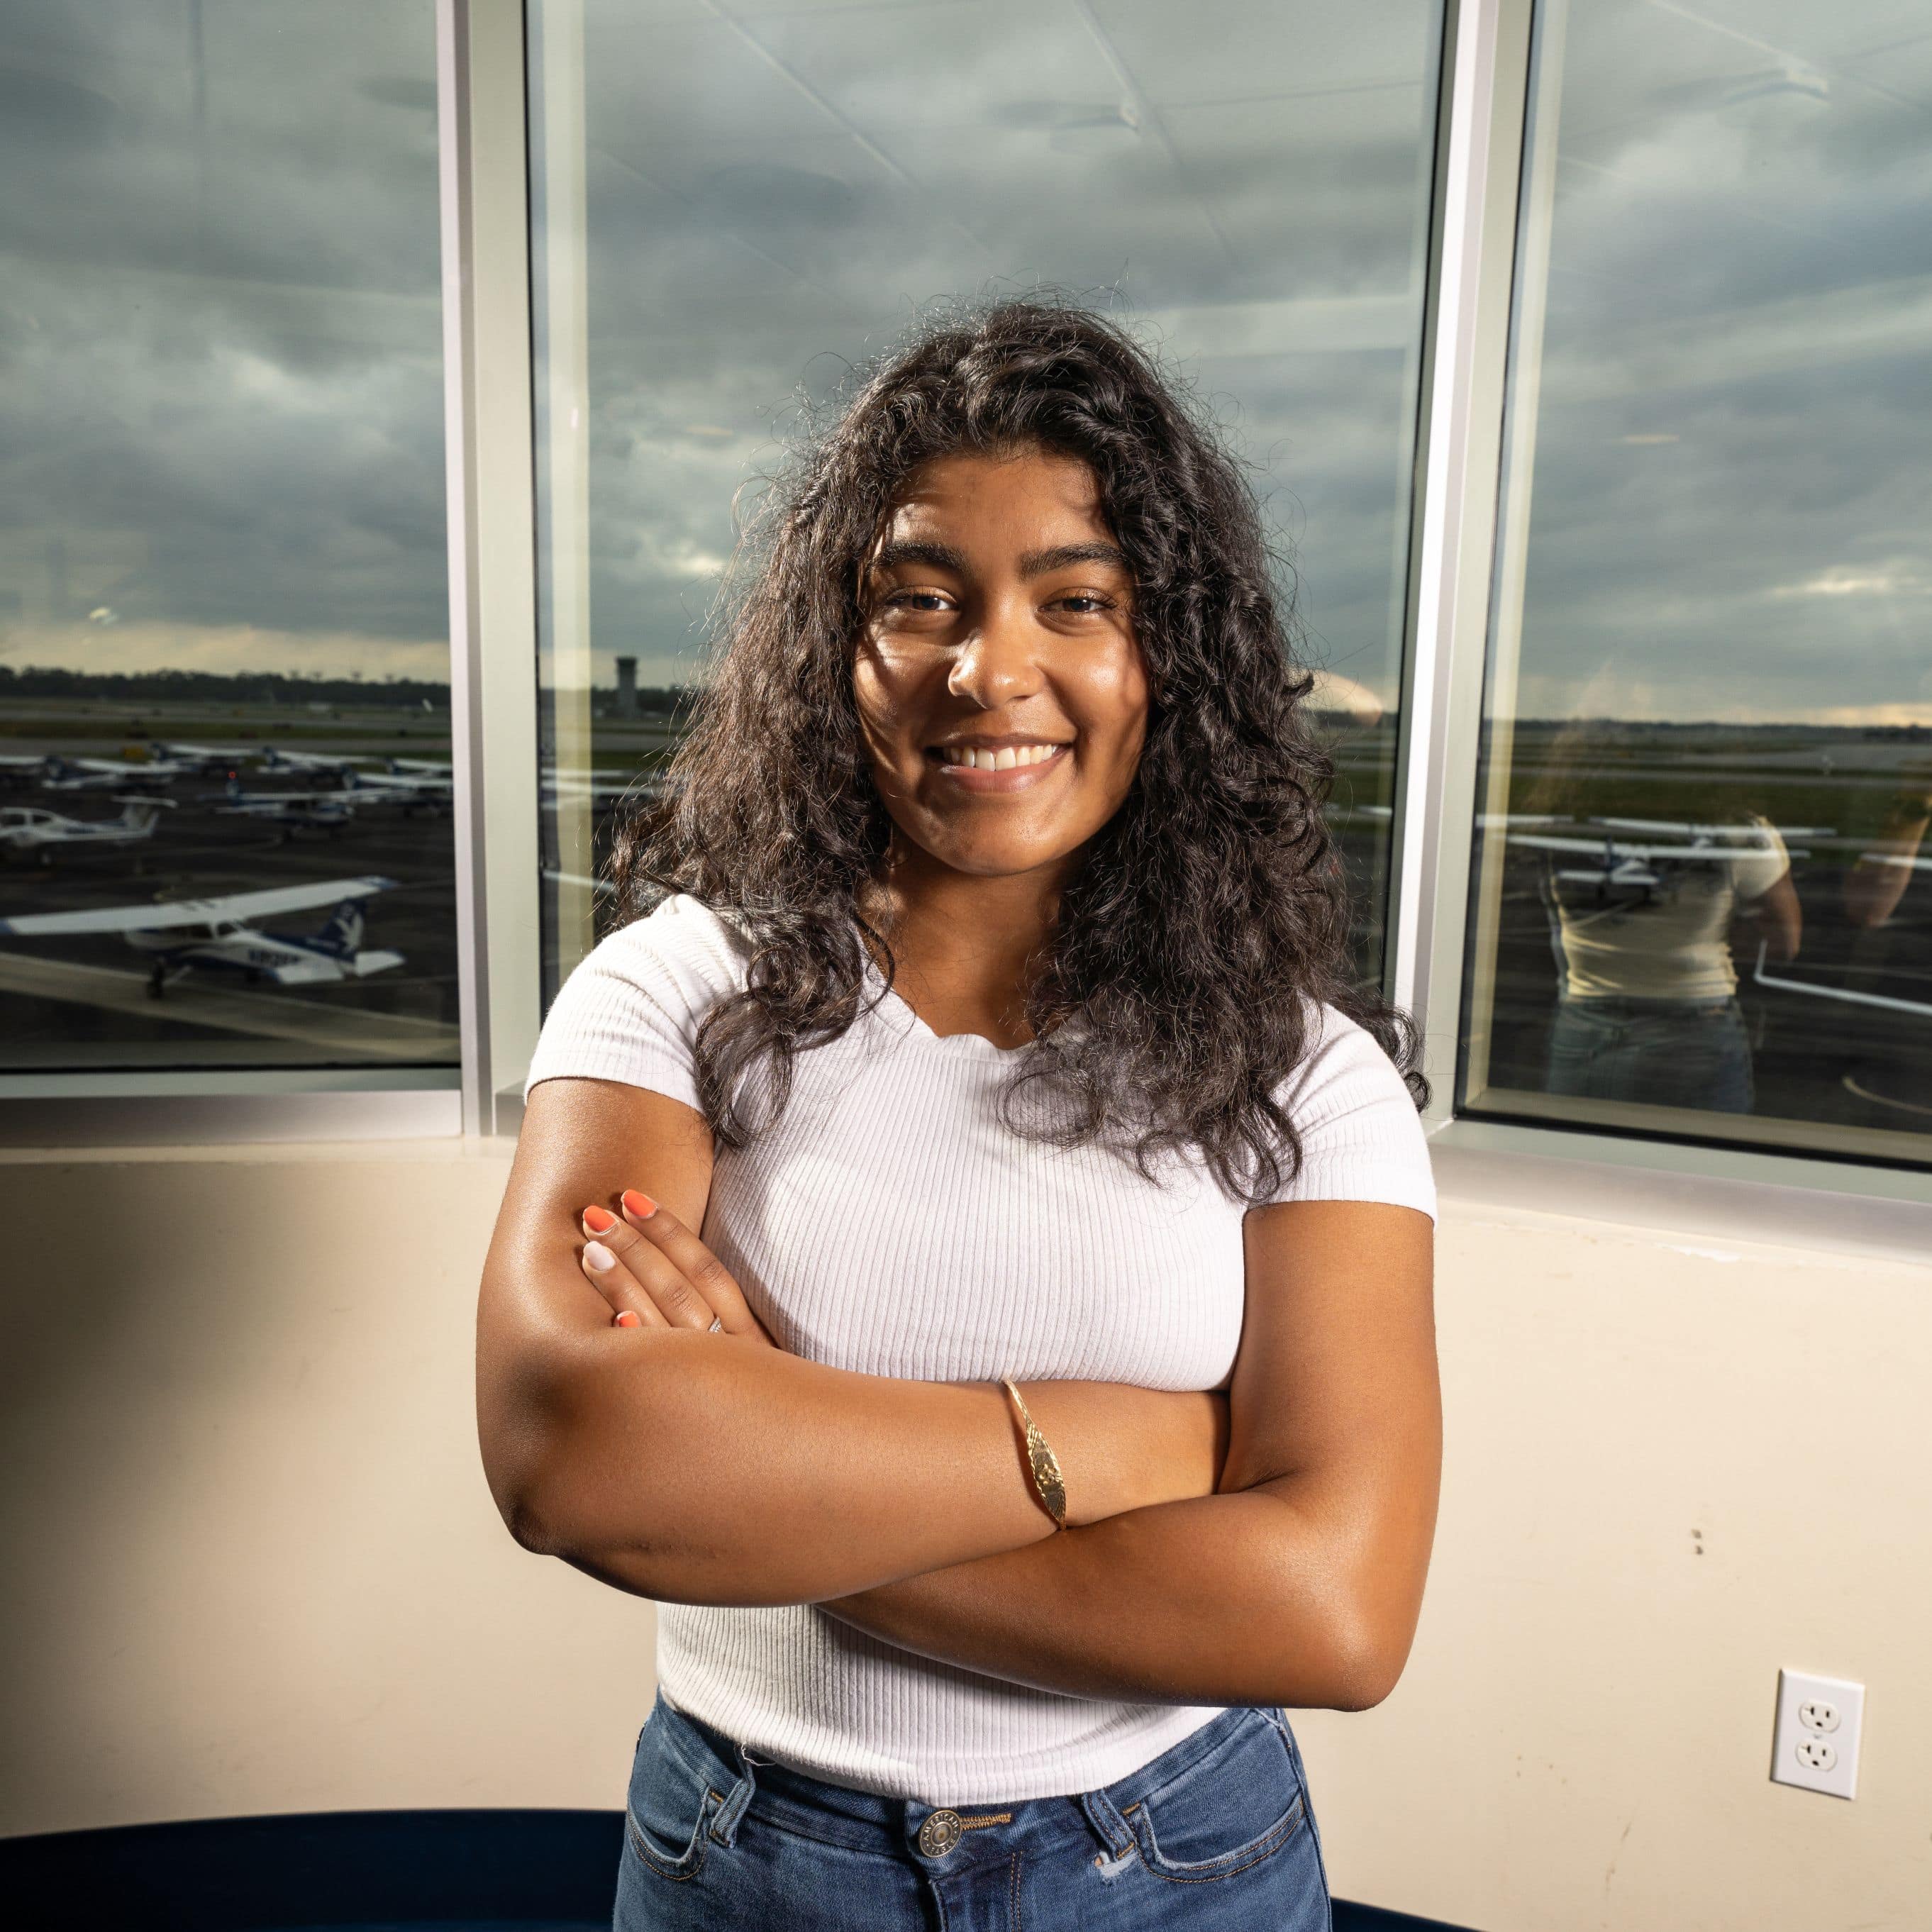 Boeing Scholar and Aeronautical Science major Kaylee Lall ('26) in Embry-Riddle's Flight building overlooking the ramp. (Photo: Embry-Riddle / Bill Fredette-Huffman)